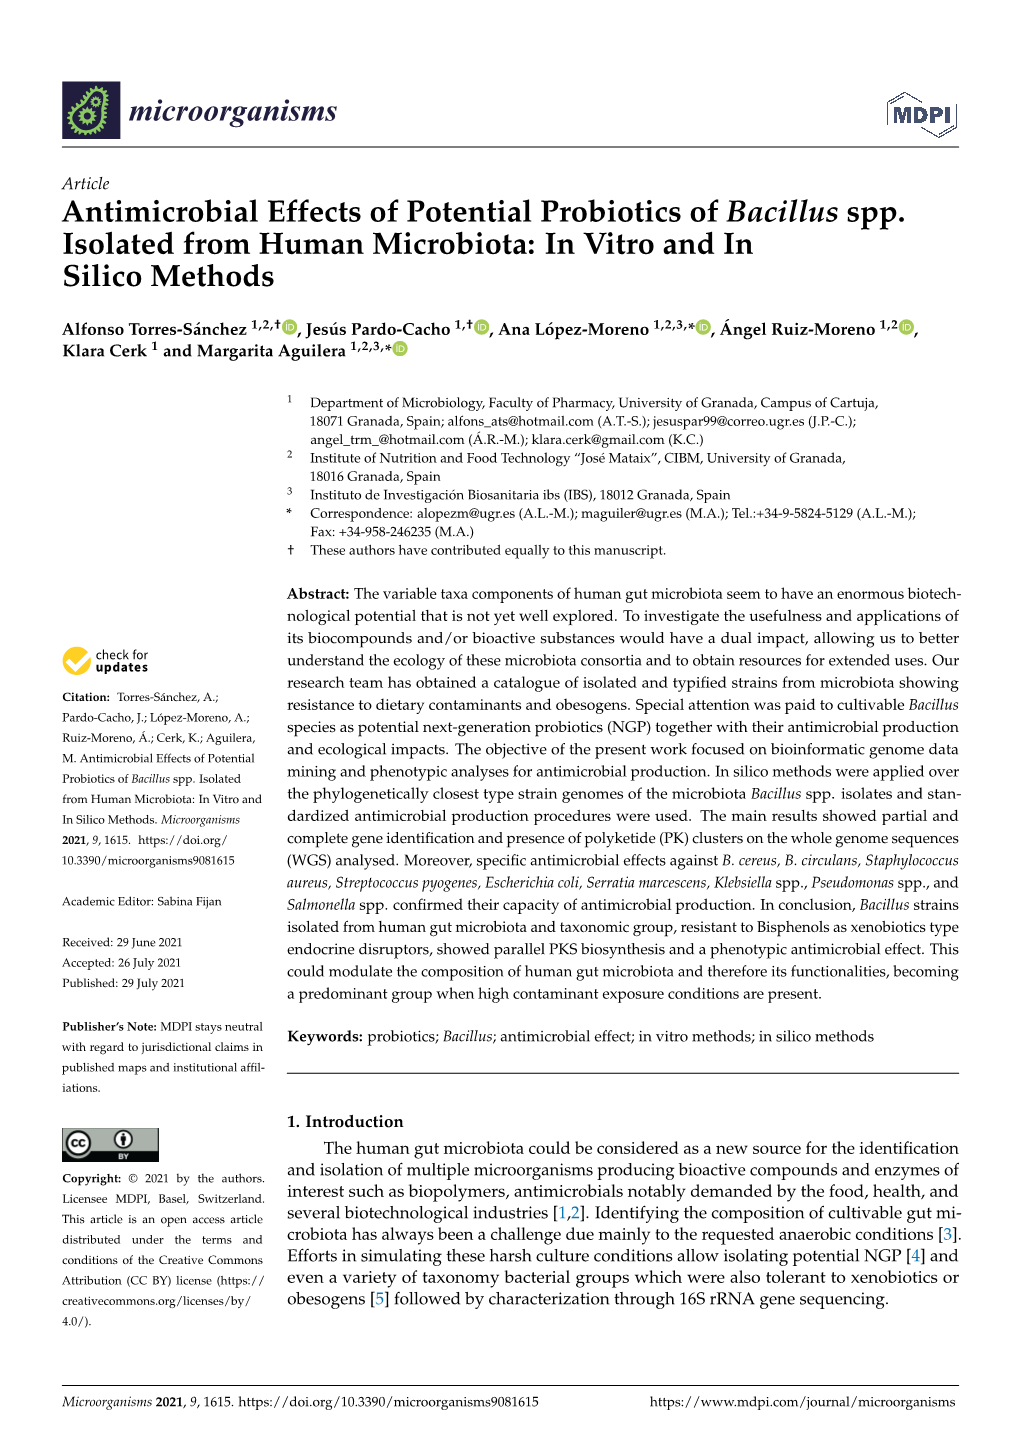 Antimicrobial Effects of Potential Probiotics of Bacillus Spp. Isolated from Human Microbiota: in Vitro and in Silico Methods